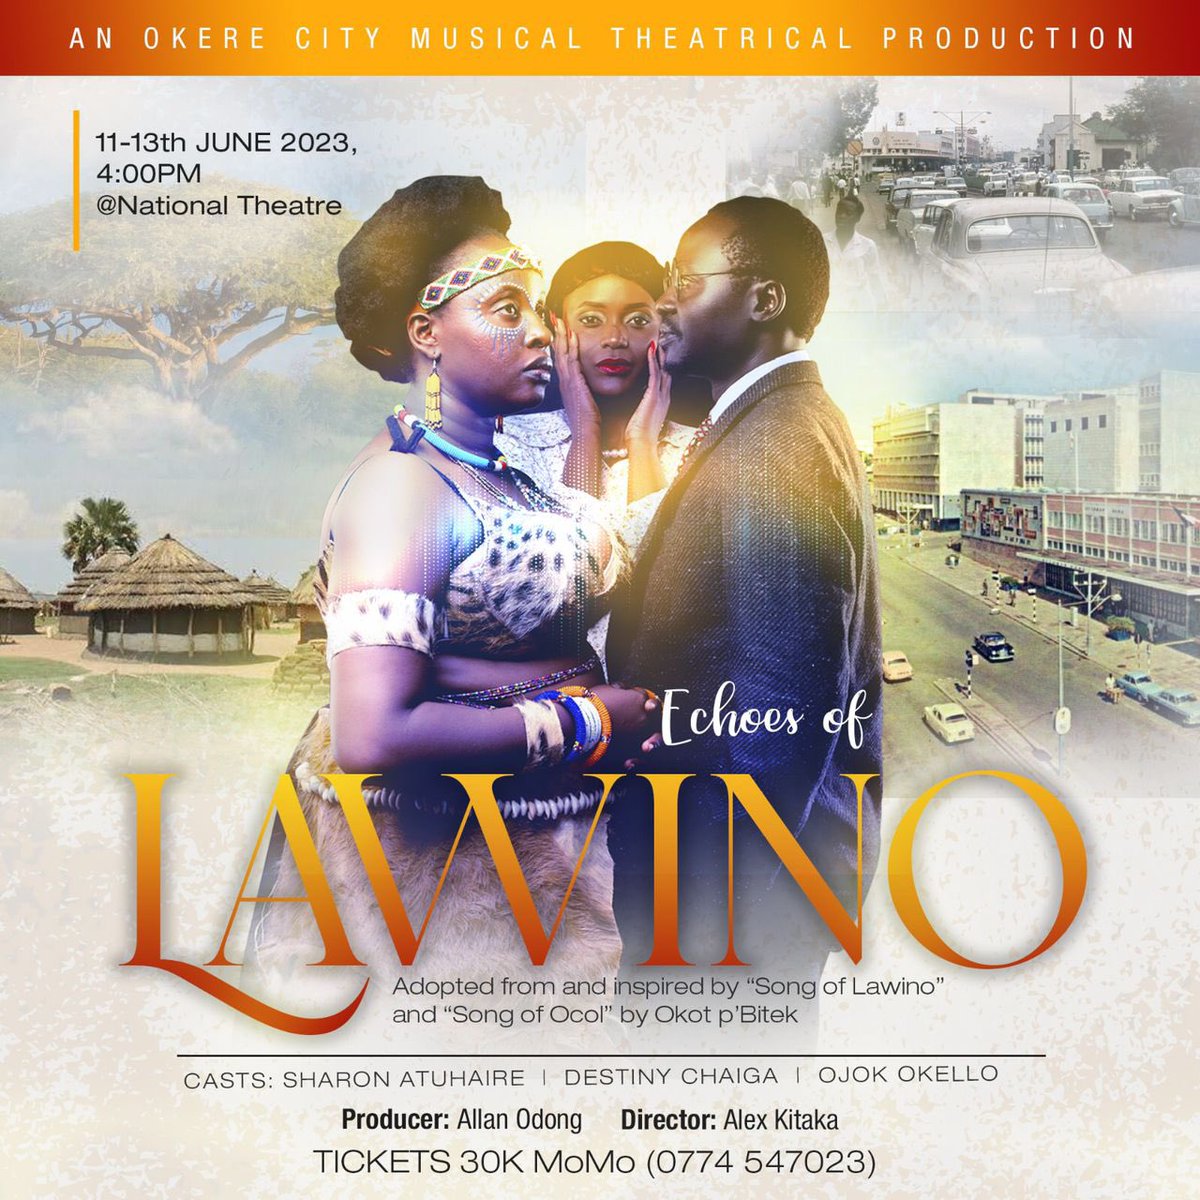 We are delighted to bring #SongOfLawino by #OkotpBitek to theatre. Through the #EchoesOfLawino production, we seek to reawaken one of the classical texts and use it as a vehicle to ask pertinent and complex questions around #decolonization, #africanfeminism and #panafricanism.